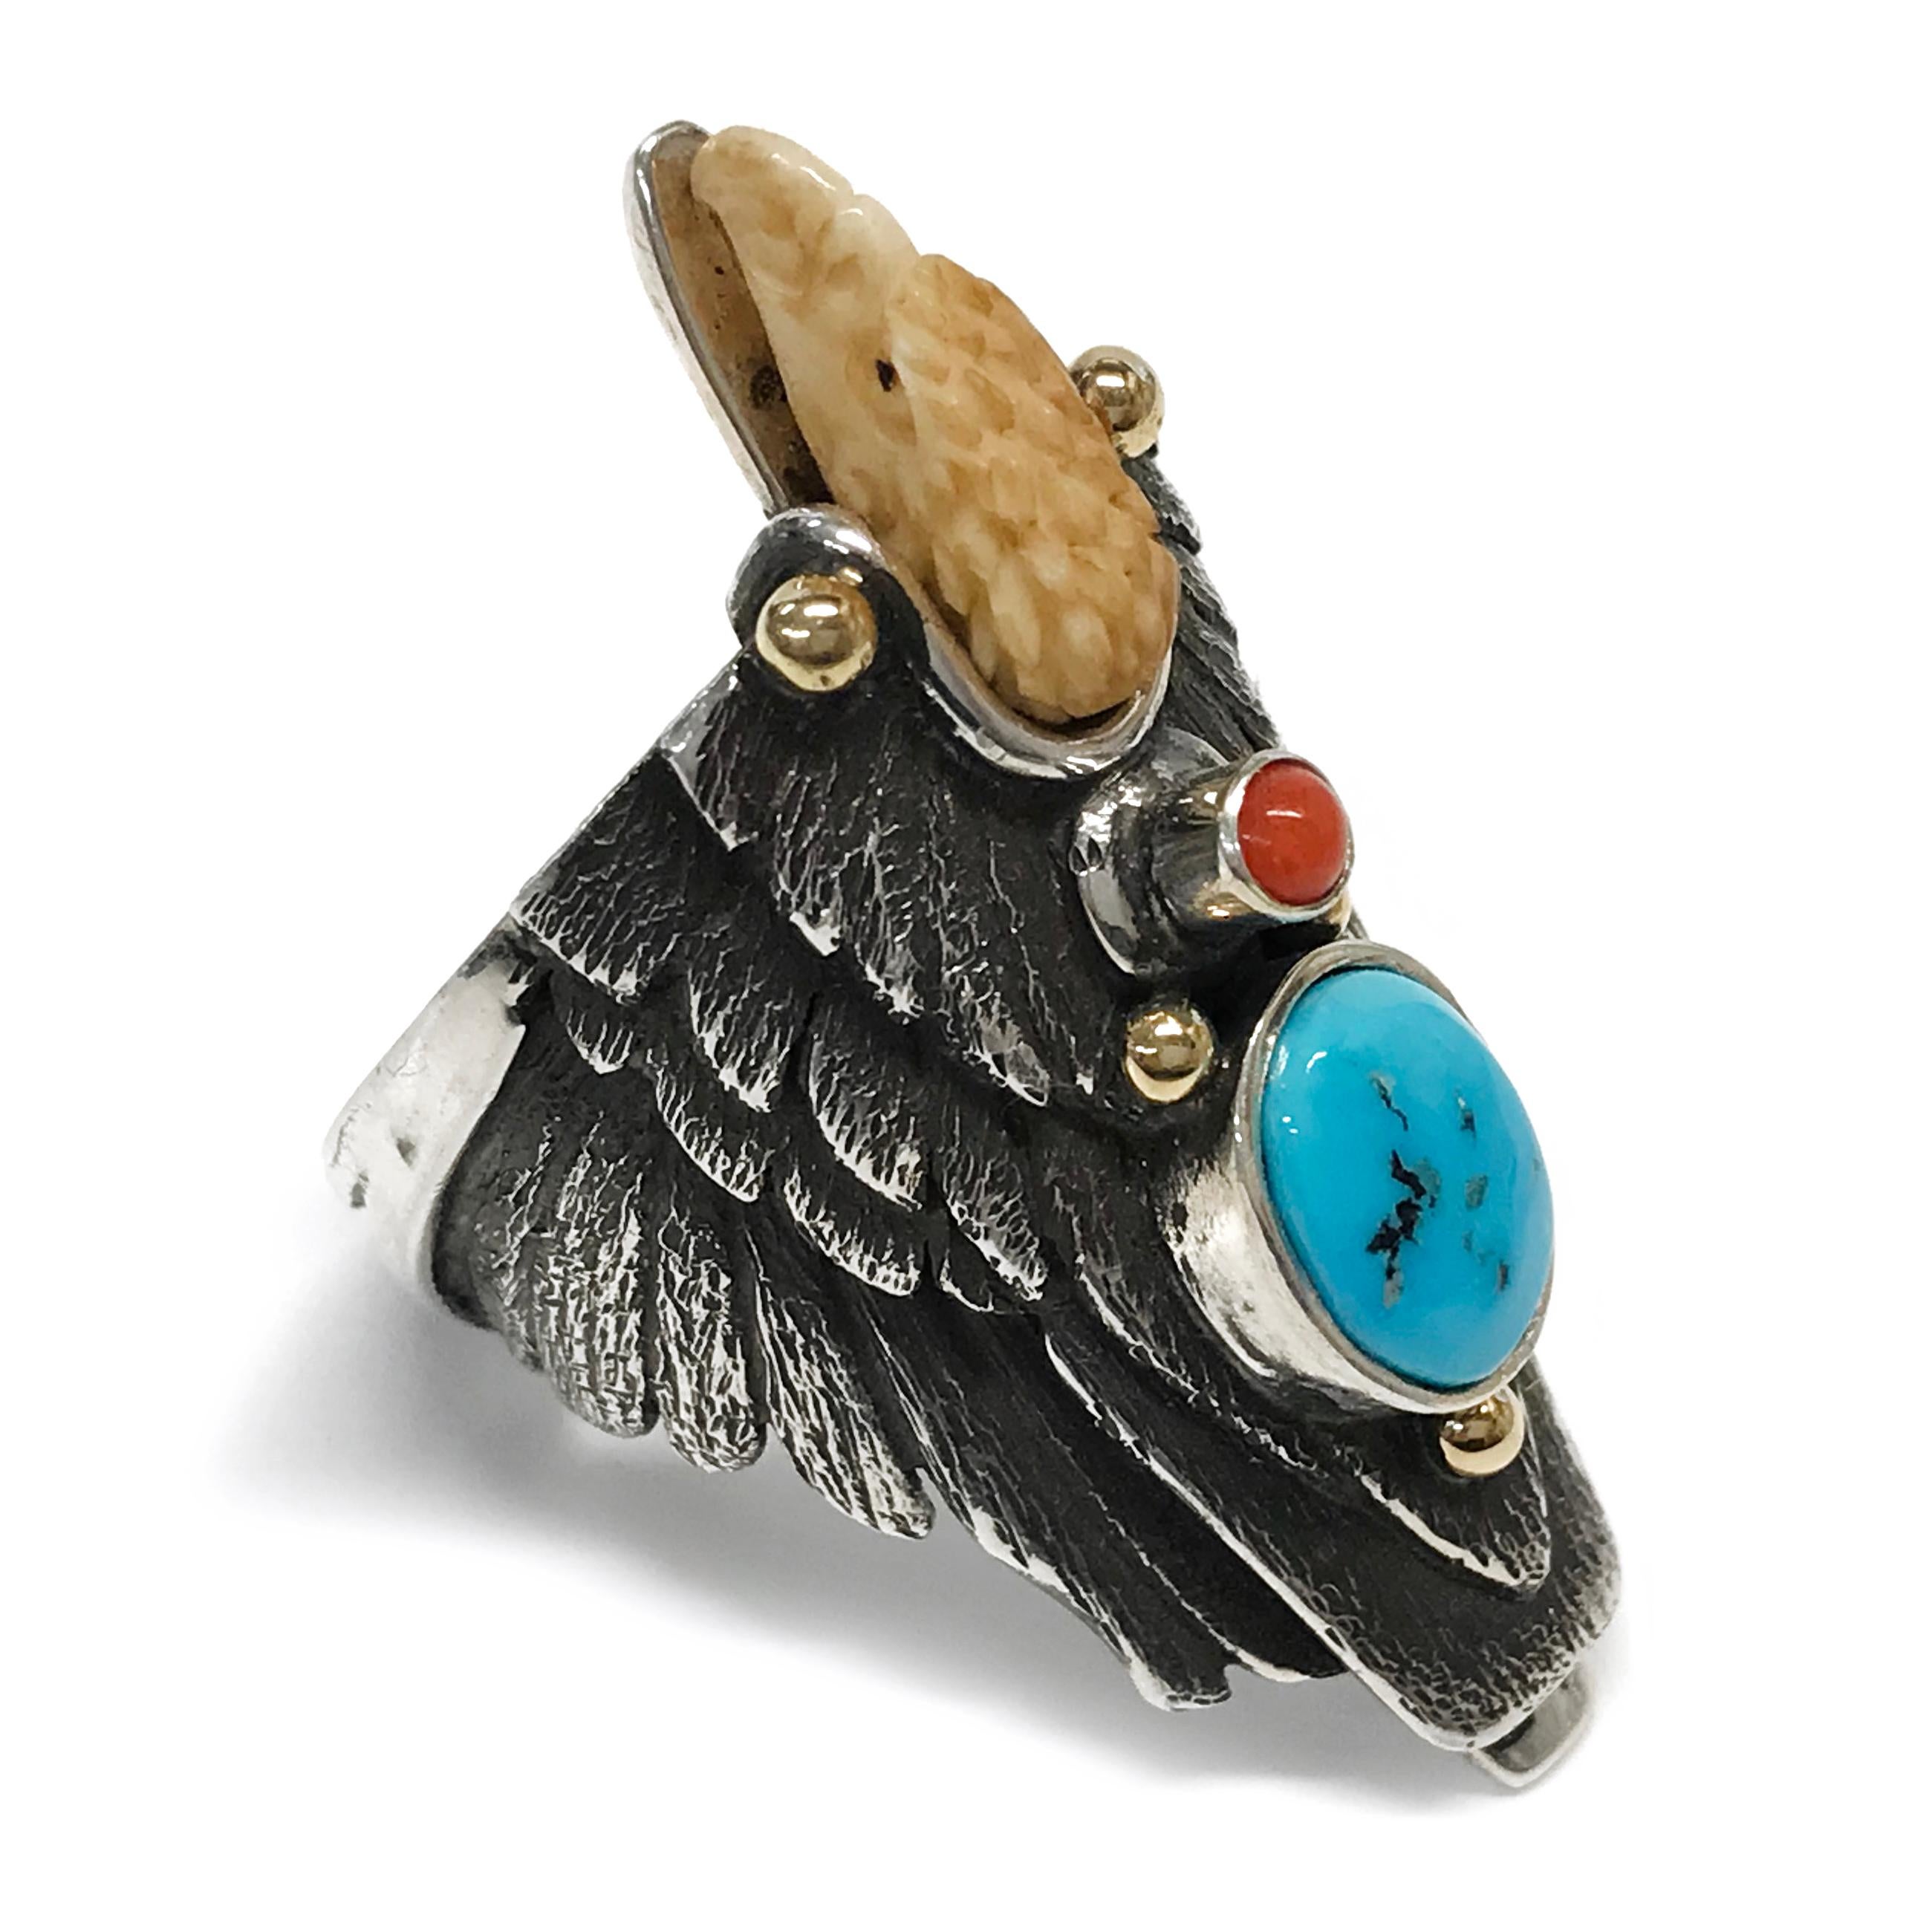 Handcrafted from Sterling Silver with 14k accents by jewelry maker, Ray Winner. This absolutely glorious ring features a natural Sleeping Beauty Turquoise oval cabochon and Mediterranean Coral round cabochon bezel set. The form of the ring band is